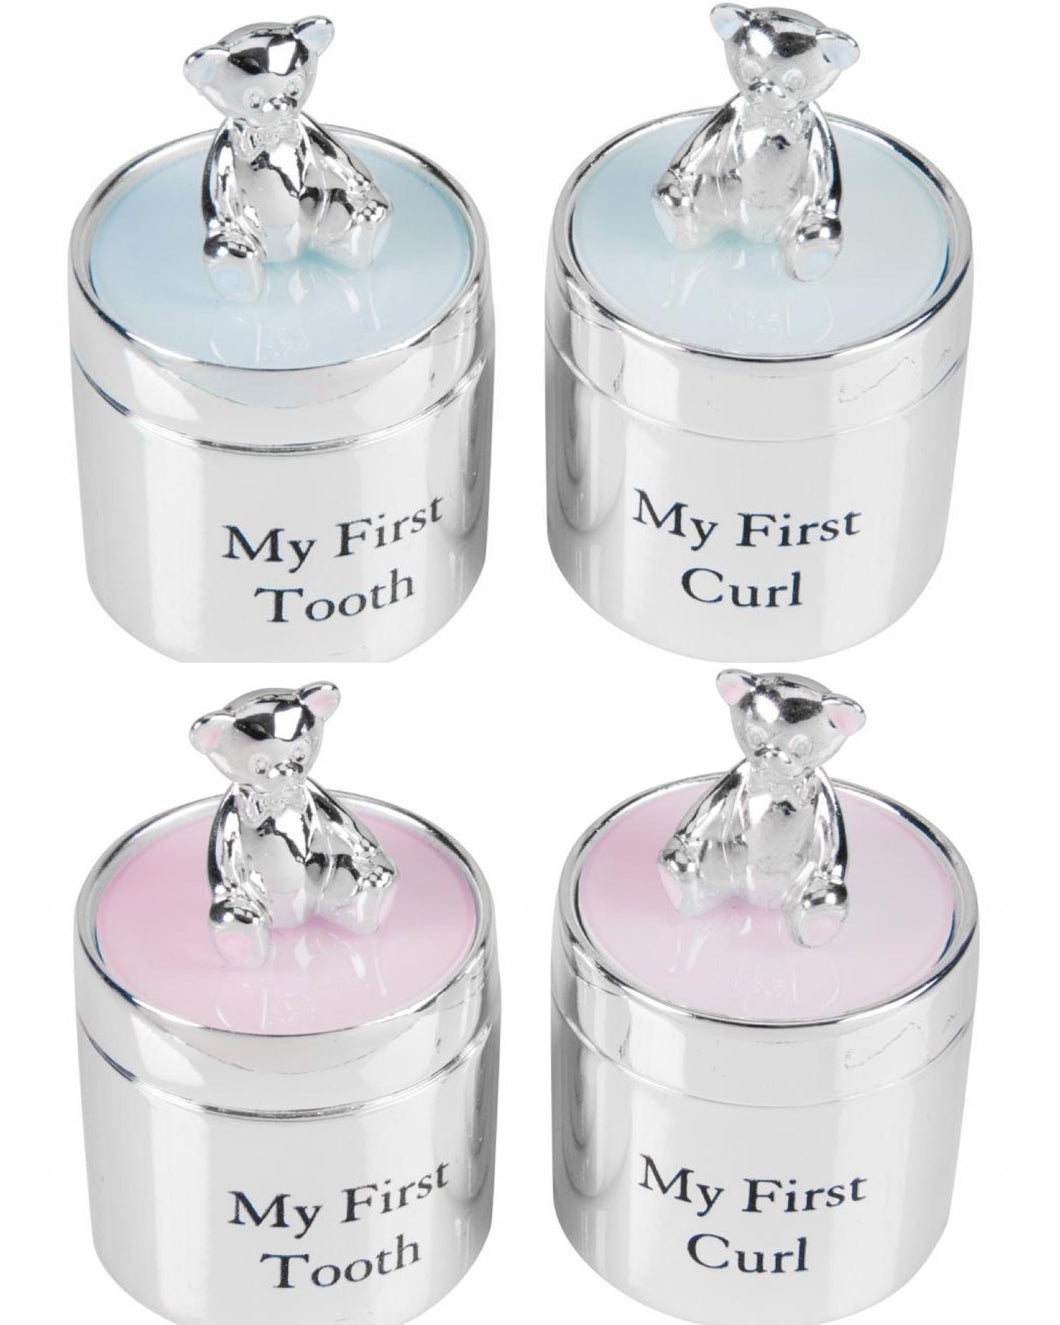 My first tooth & curl gift set